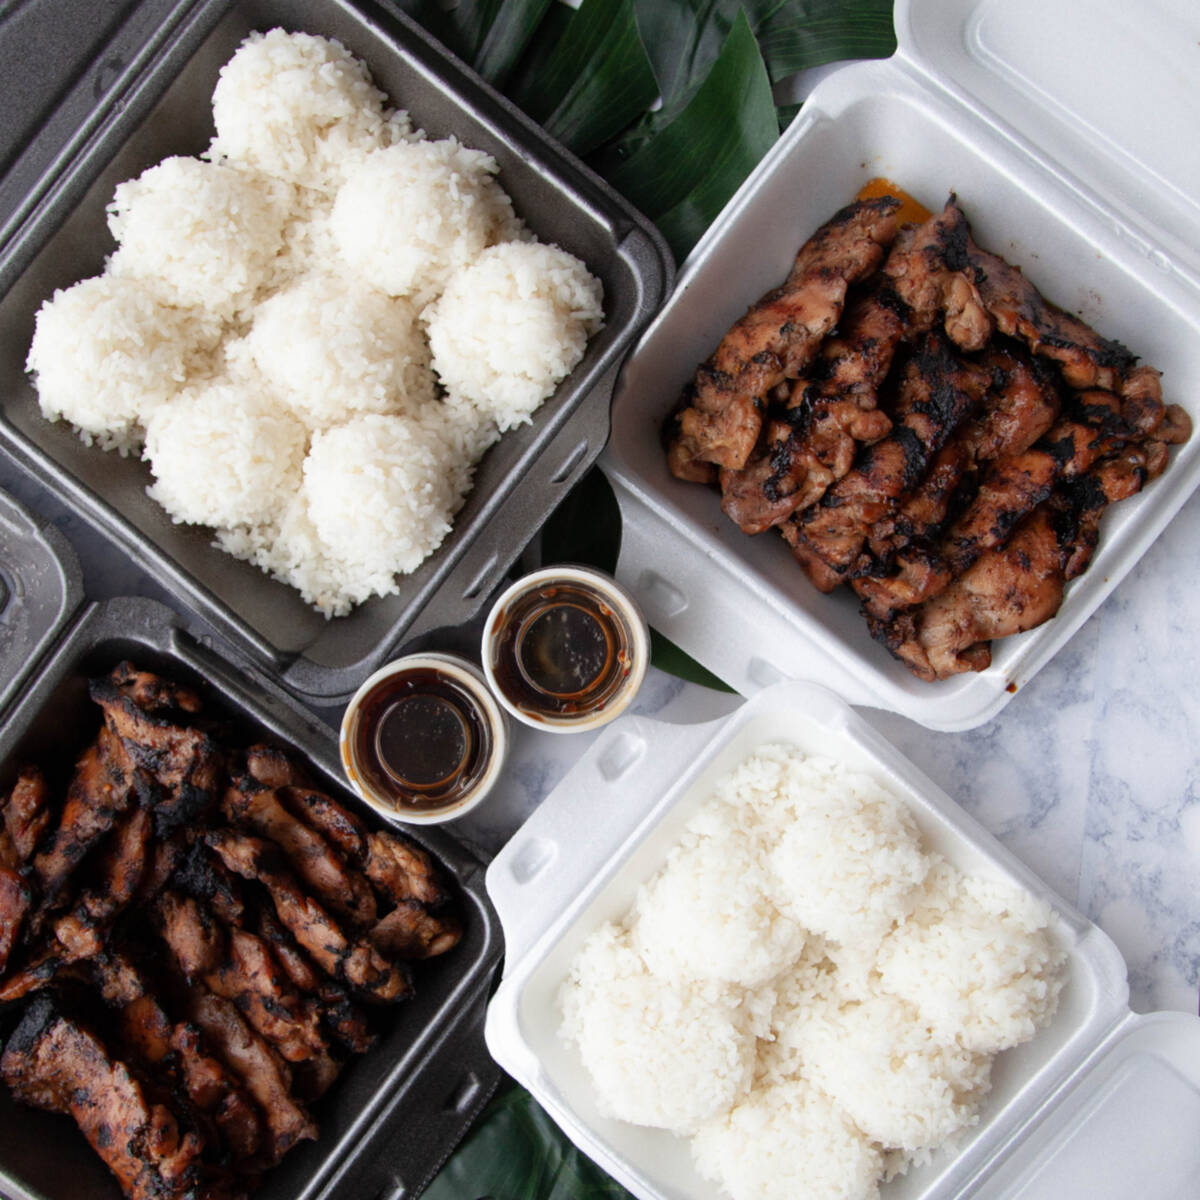 A family-size Ohana Meal from Mo' Bettahs, the chain of Hawaiian restaurants that is set to ope ...